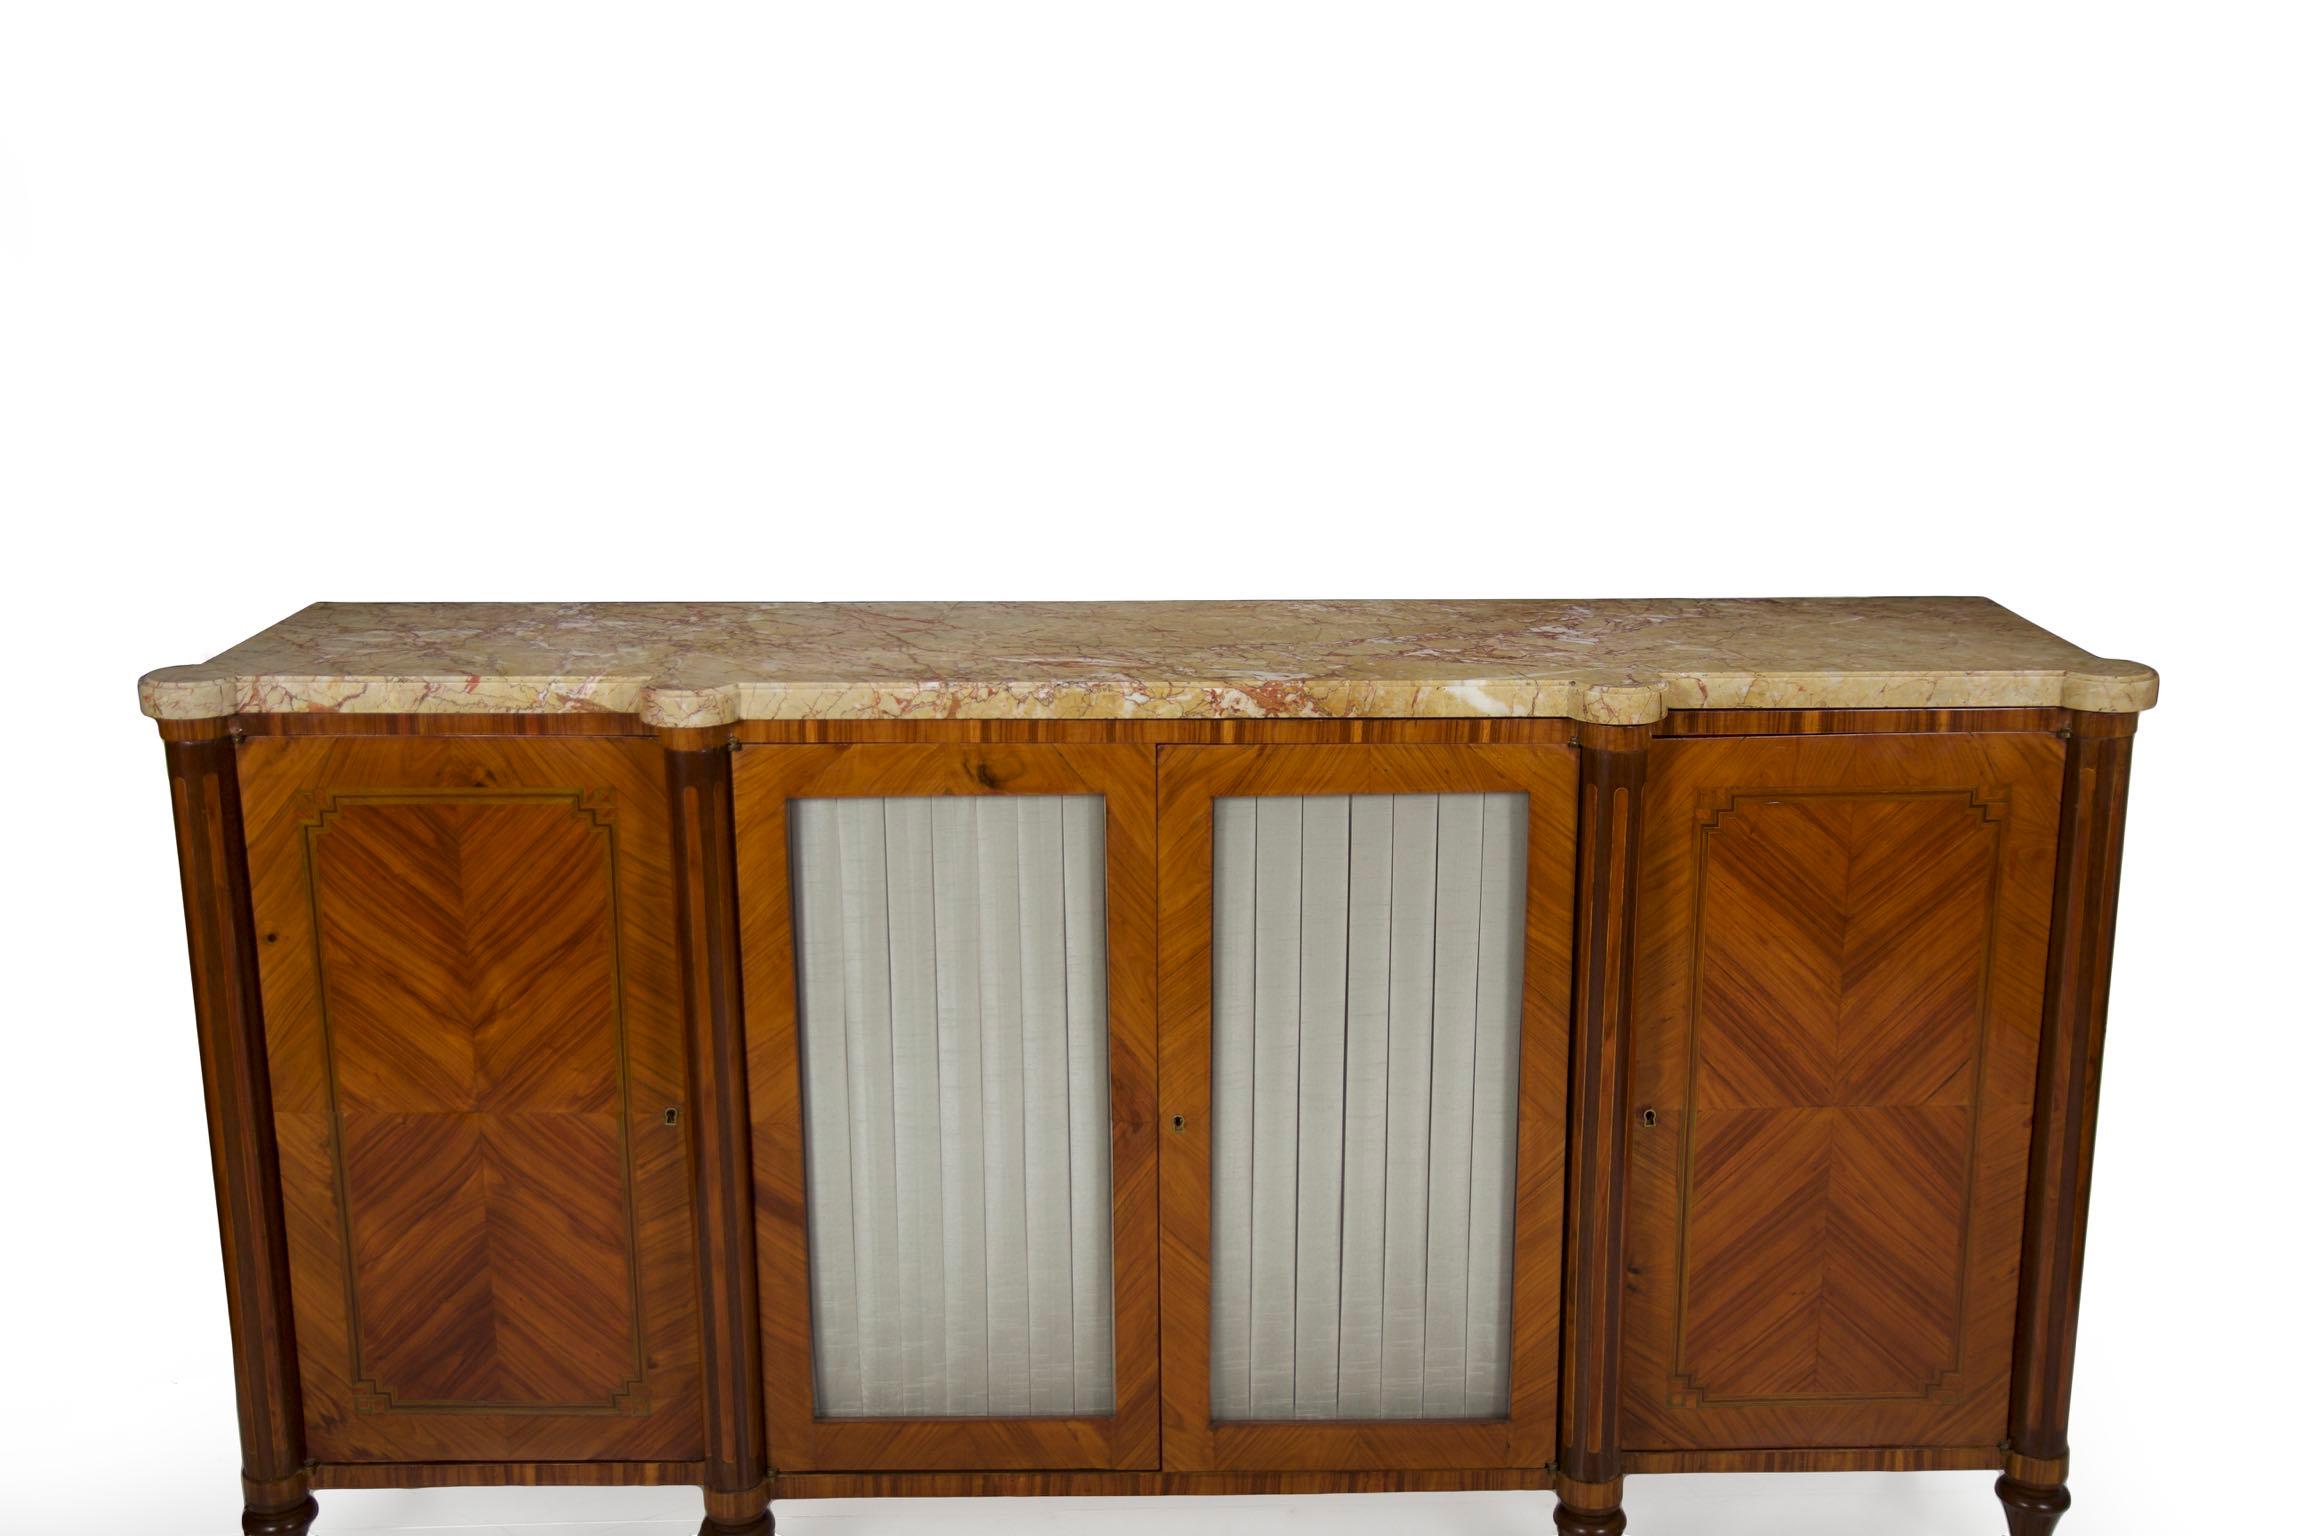 Neoclassical  French Louis XVI Style Antique Marble Top Buffet Server Sideboard, 19th Century